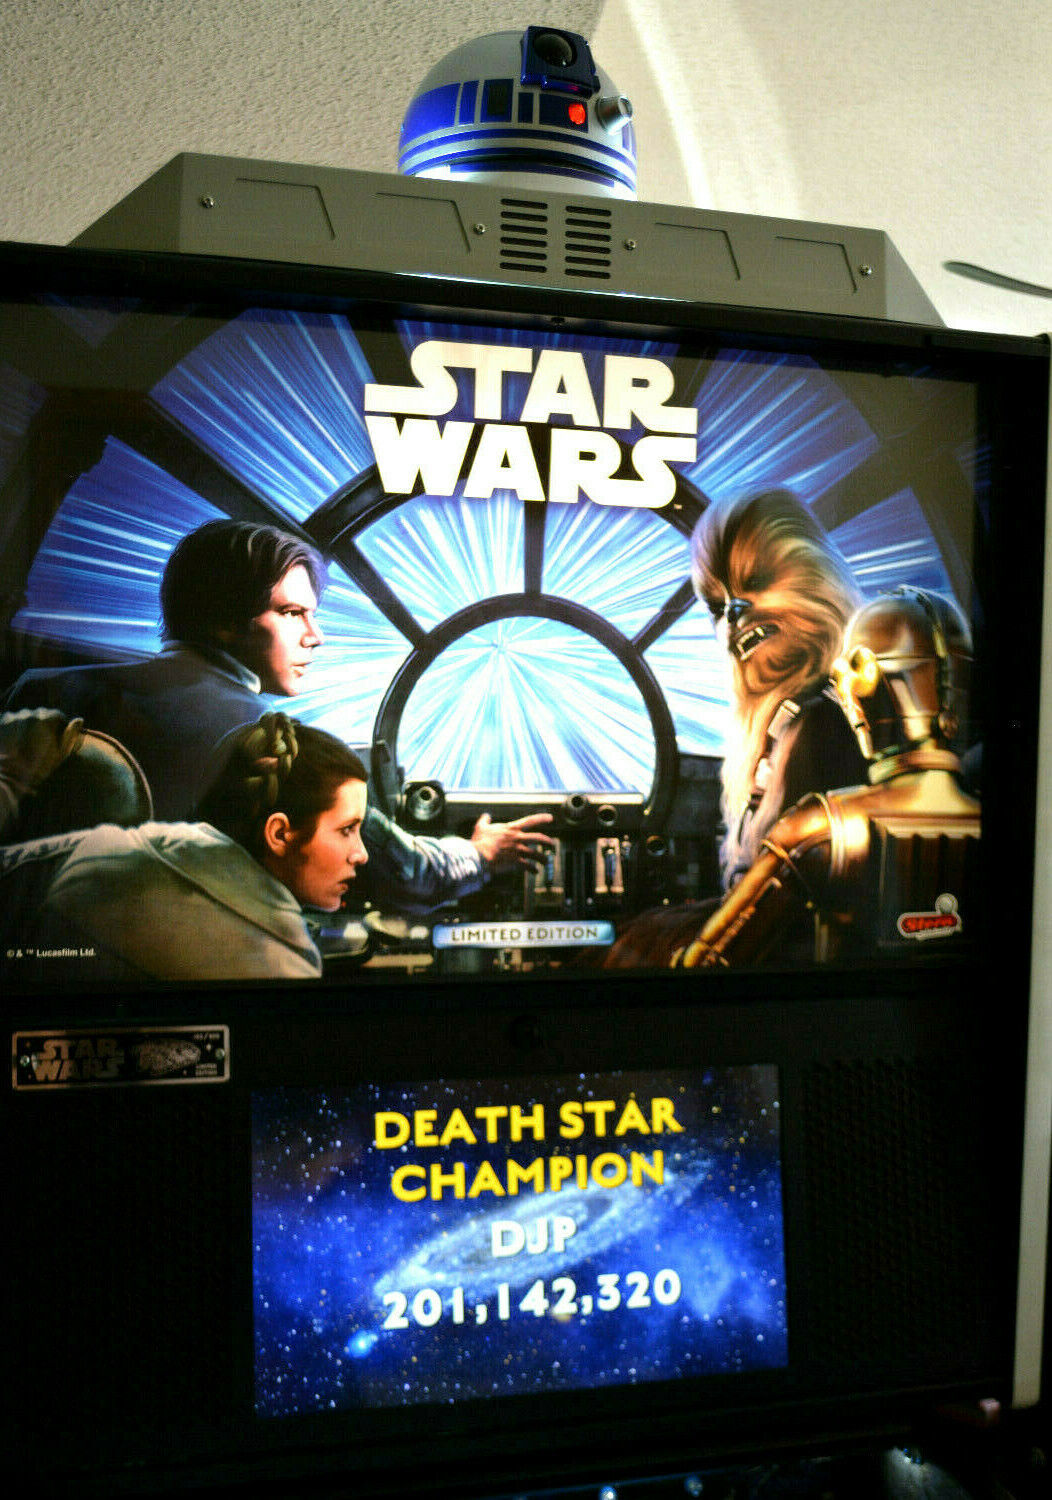 Stern * Star Wars Limited Edition (#102 of 800) pInball - with R2-D2 topper  * 